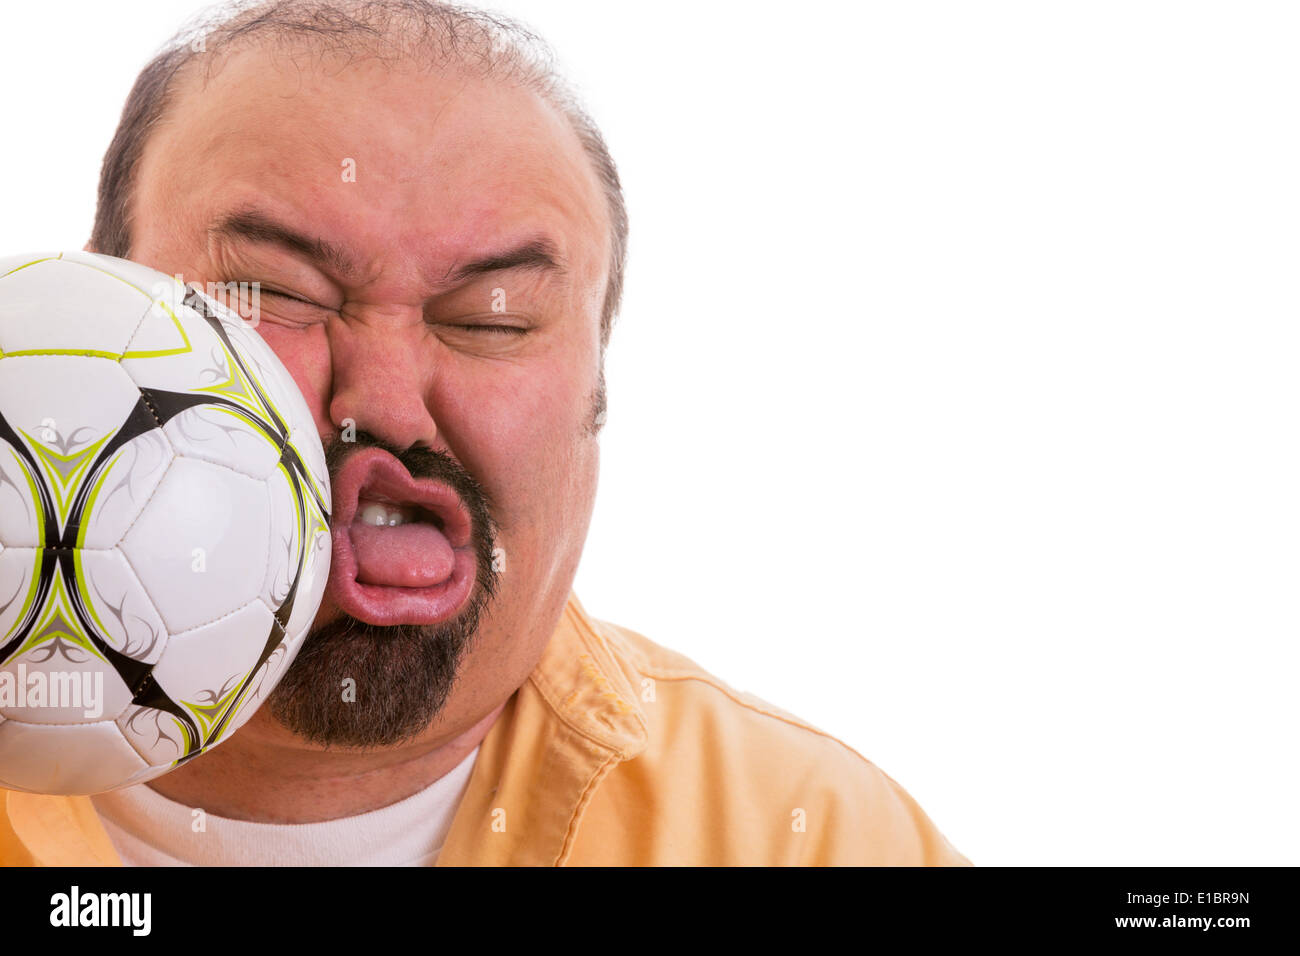 Fun picture of a middle-aged man with a goatee having the wind knocked out of him by the unexpected force of a soccer ball Stock Photo